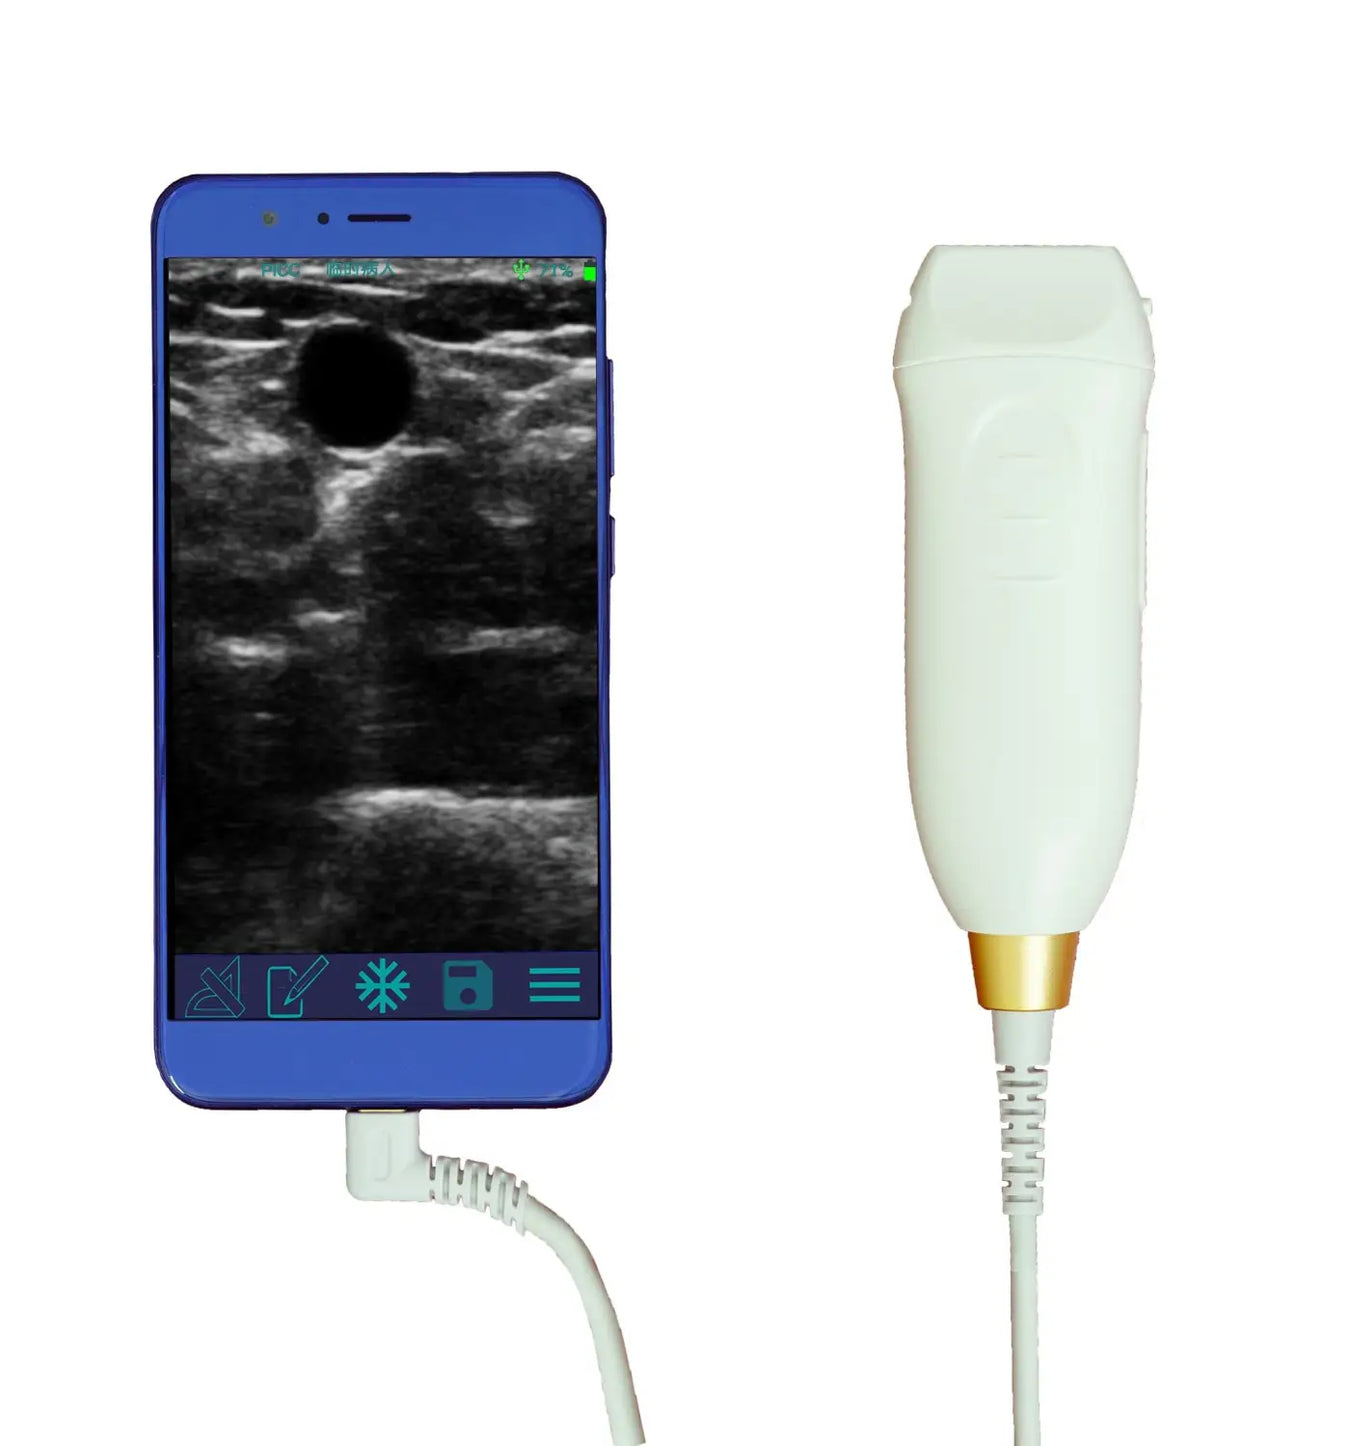 Ultrasound For Human Applications